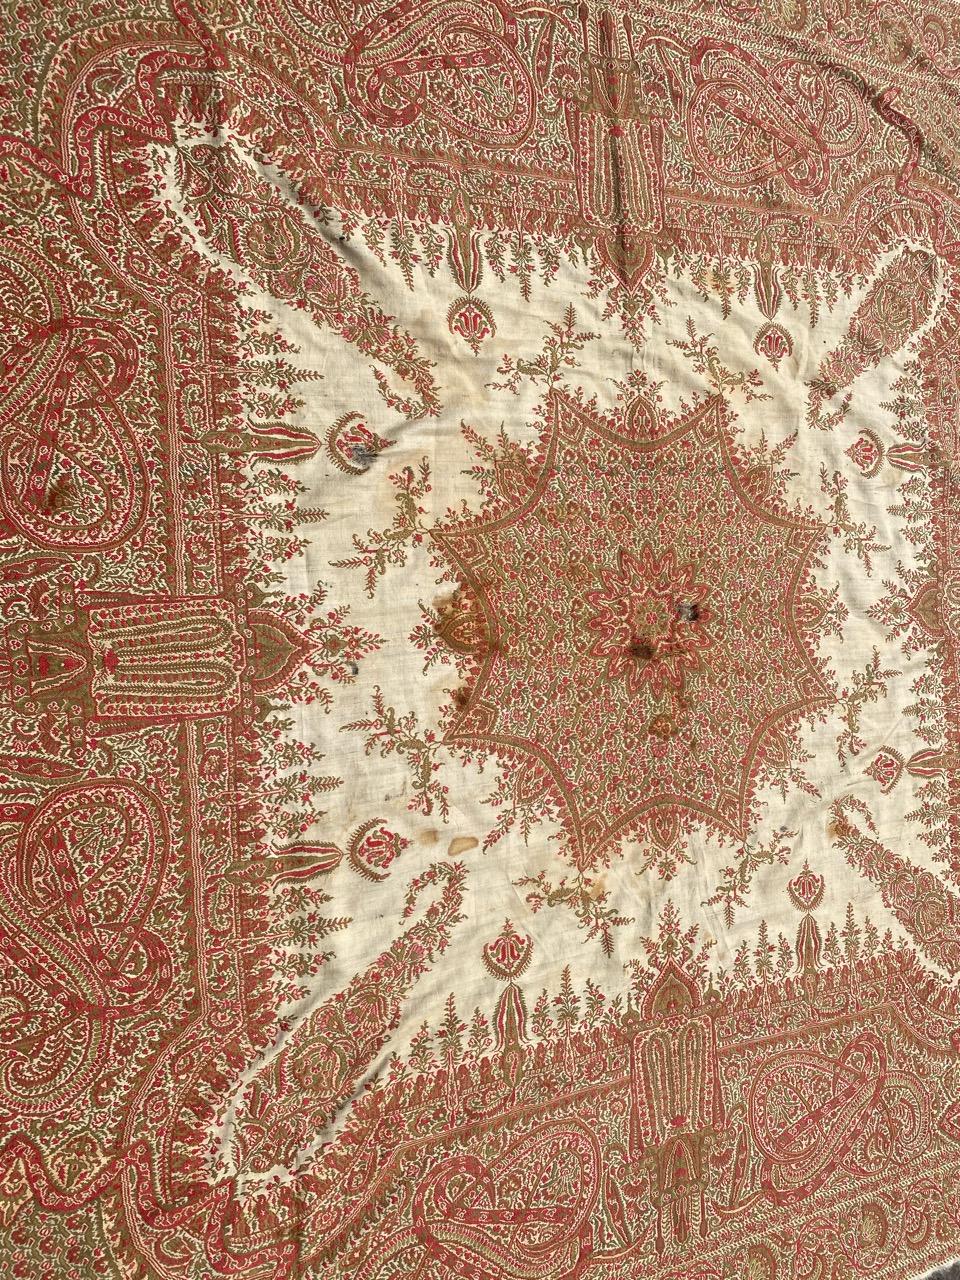 Pretty Antique French Kashmir Square Shawl For Sale 3